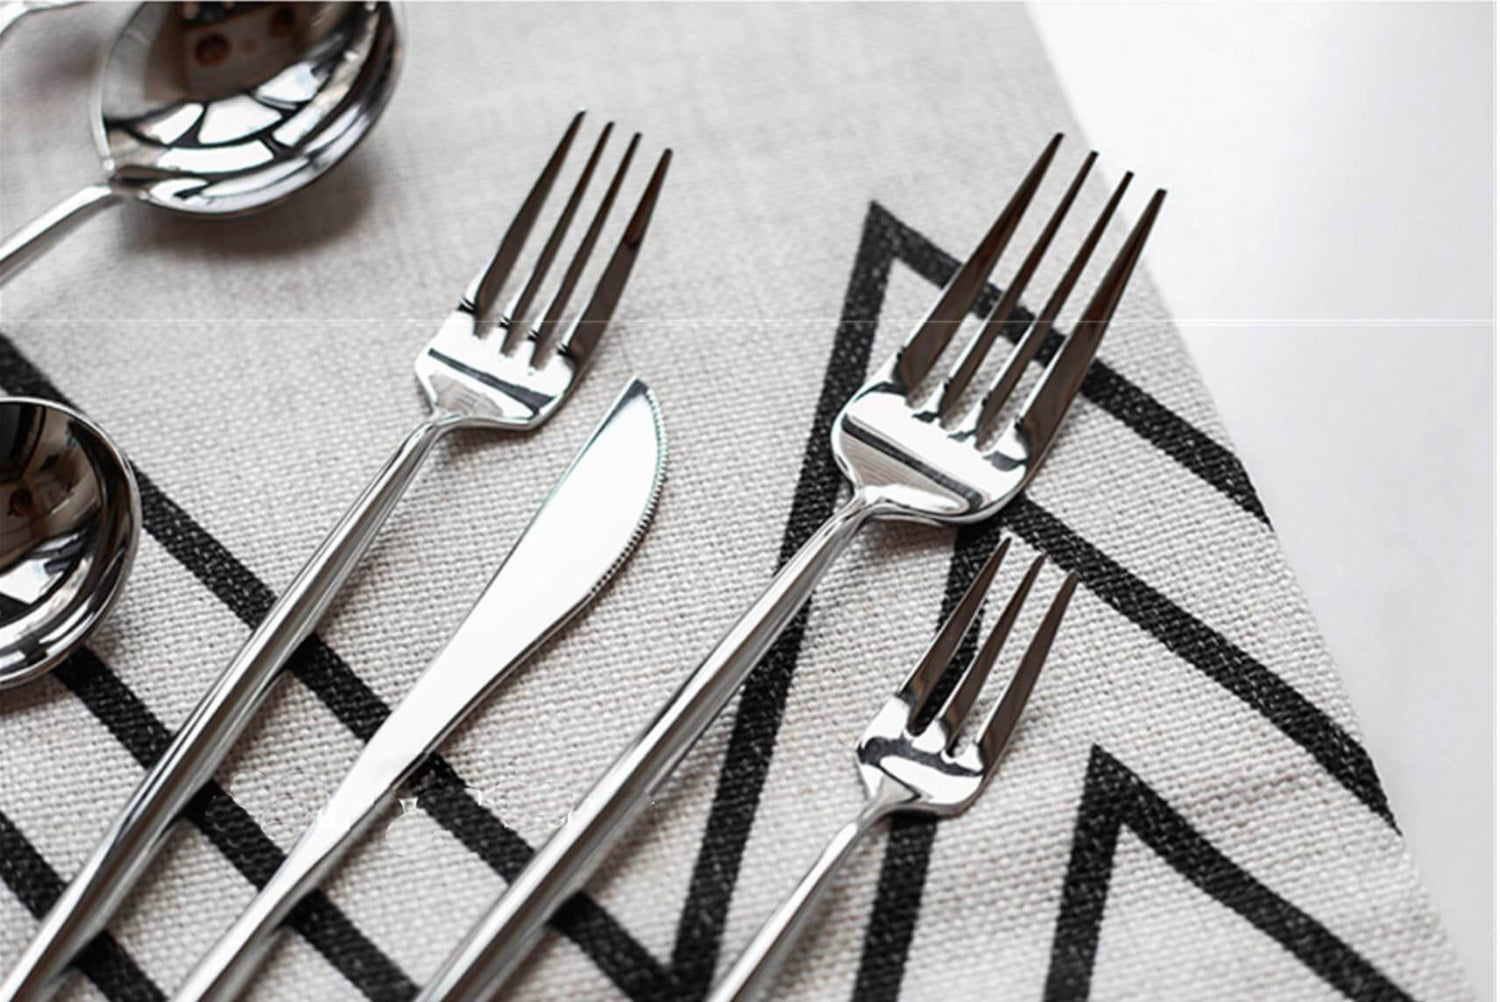 4 Pcs Mirror Surface Silver Cutlery Set - Nordic Side - 